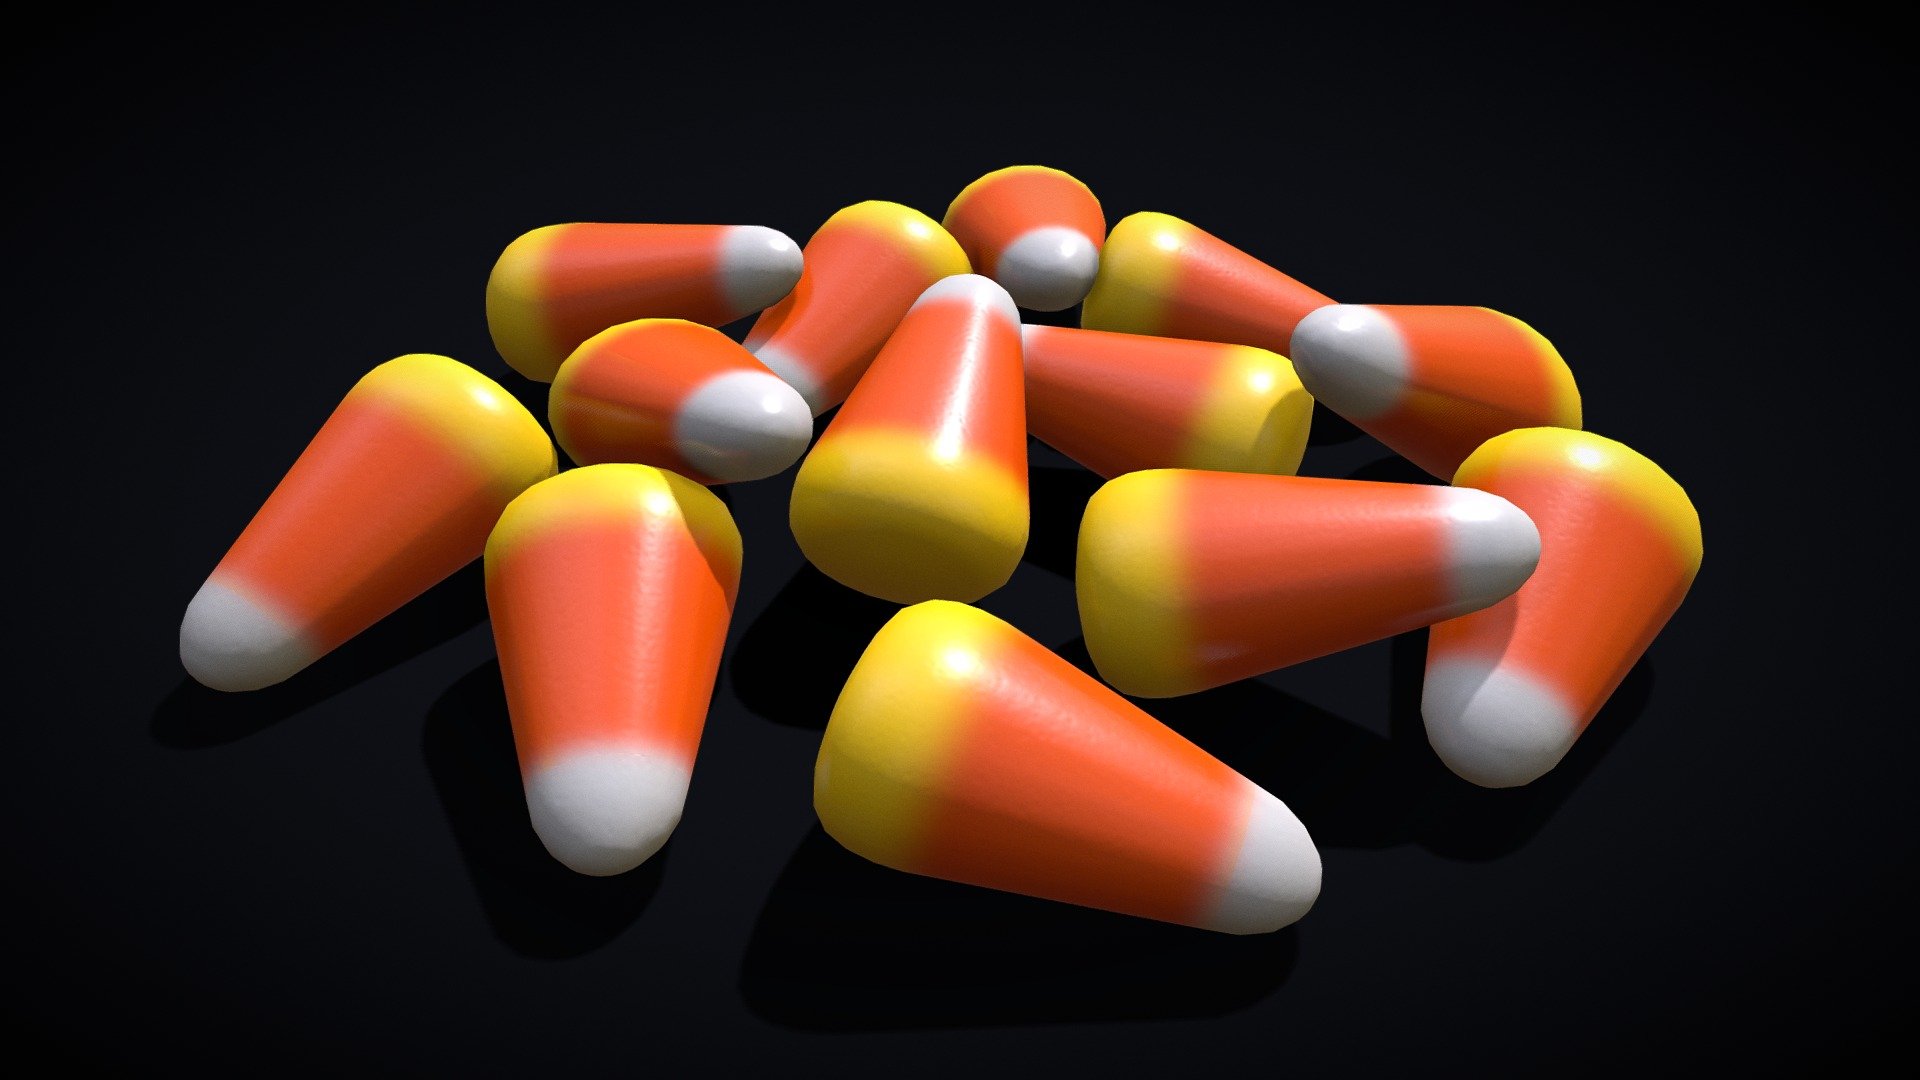 Candy Corn Pile 3D Model 
PBR Texture 4K 
Low Poly 
Halloween Treats
VR / AR / Low-poly
PBR approved
Geometry Polygon mesh
Polygons 3,900
Vertices 3,666
Textures 4K - Candy Corn Pile - Buy Royalty Free 3D model by GetDeadEntertainment 3d model